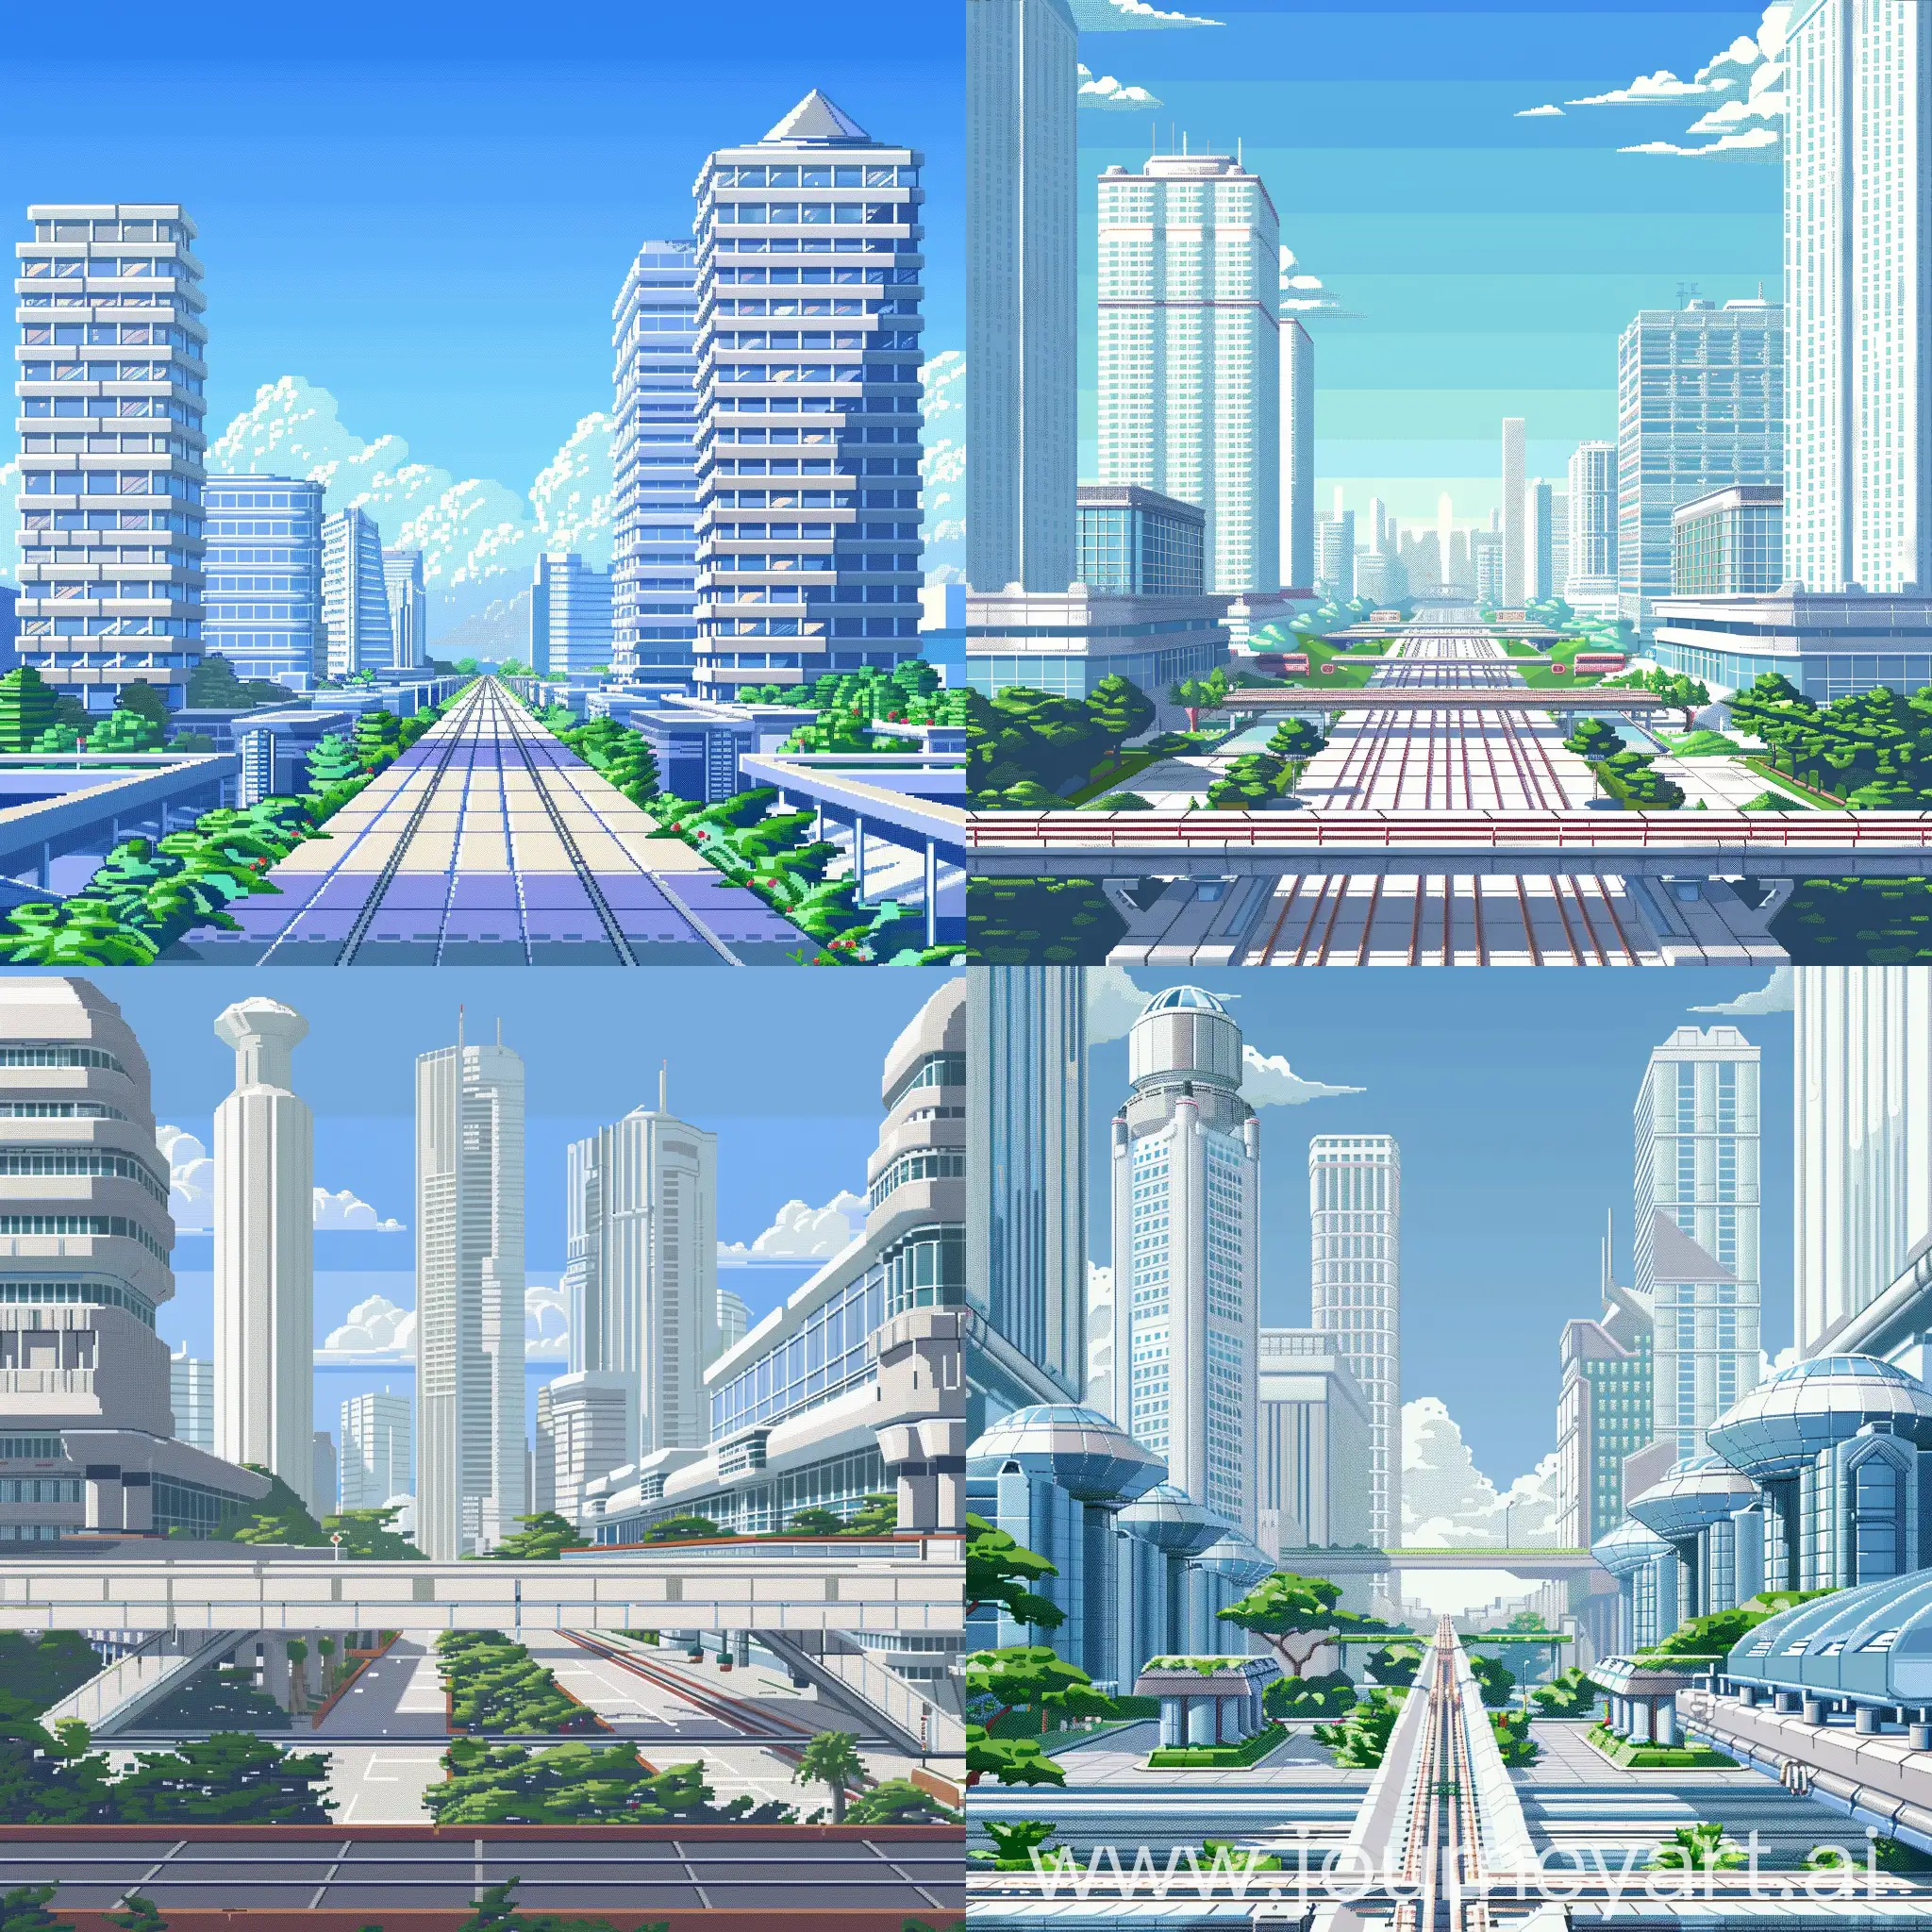 2D pixel art background for a USSR-themed game. Retrofuturism/futurism style. Day. background: Blue sky, monorail road without train, several tall buildings in the distance with white concrete and glass cladding, a lot of free space between buildings, Buildings - Rounded or sharp angles. Foreground: one glassy building 2 floors parallelepiped shape, neat vegetation  and other futuristic elements